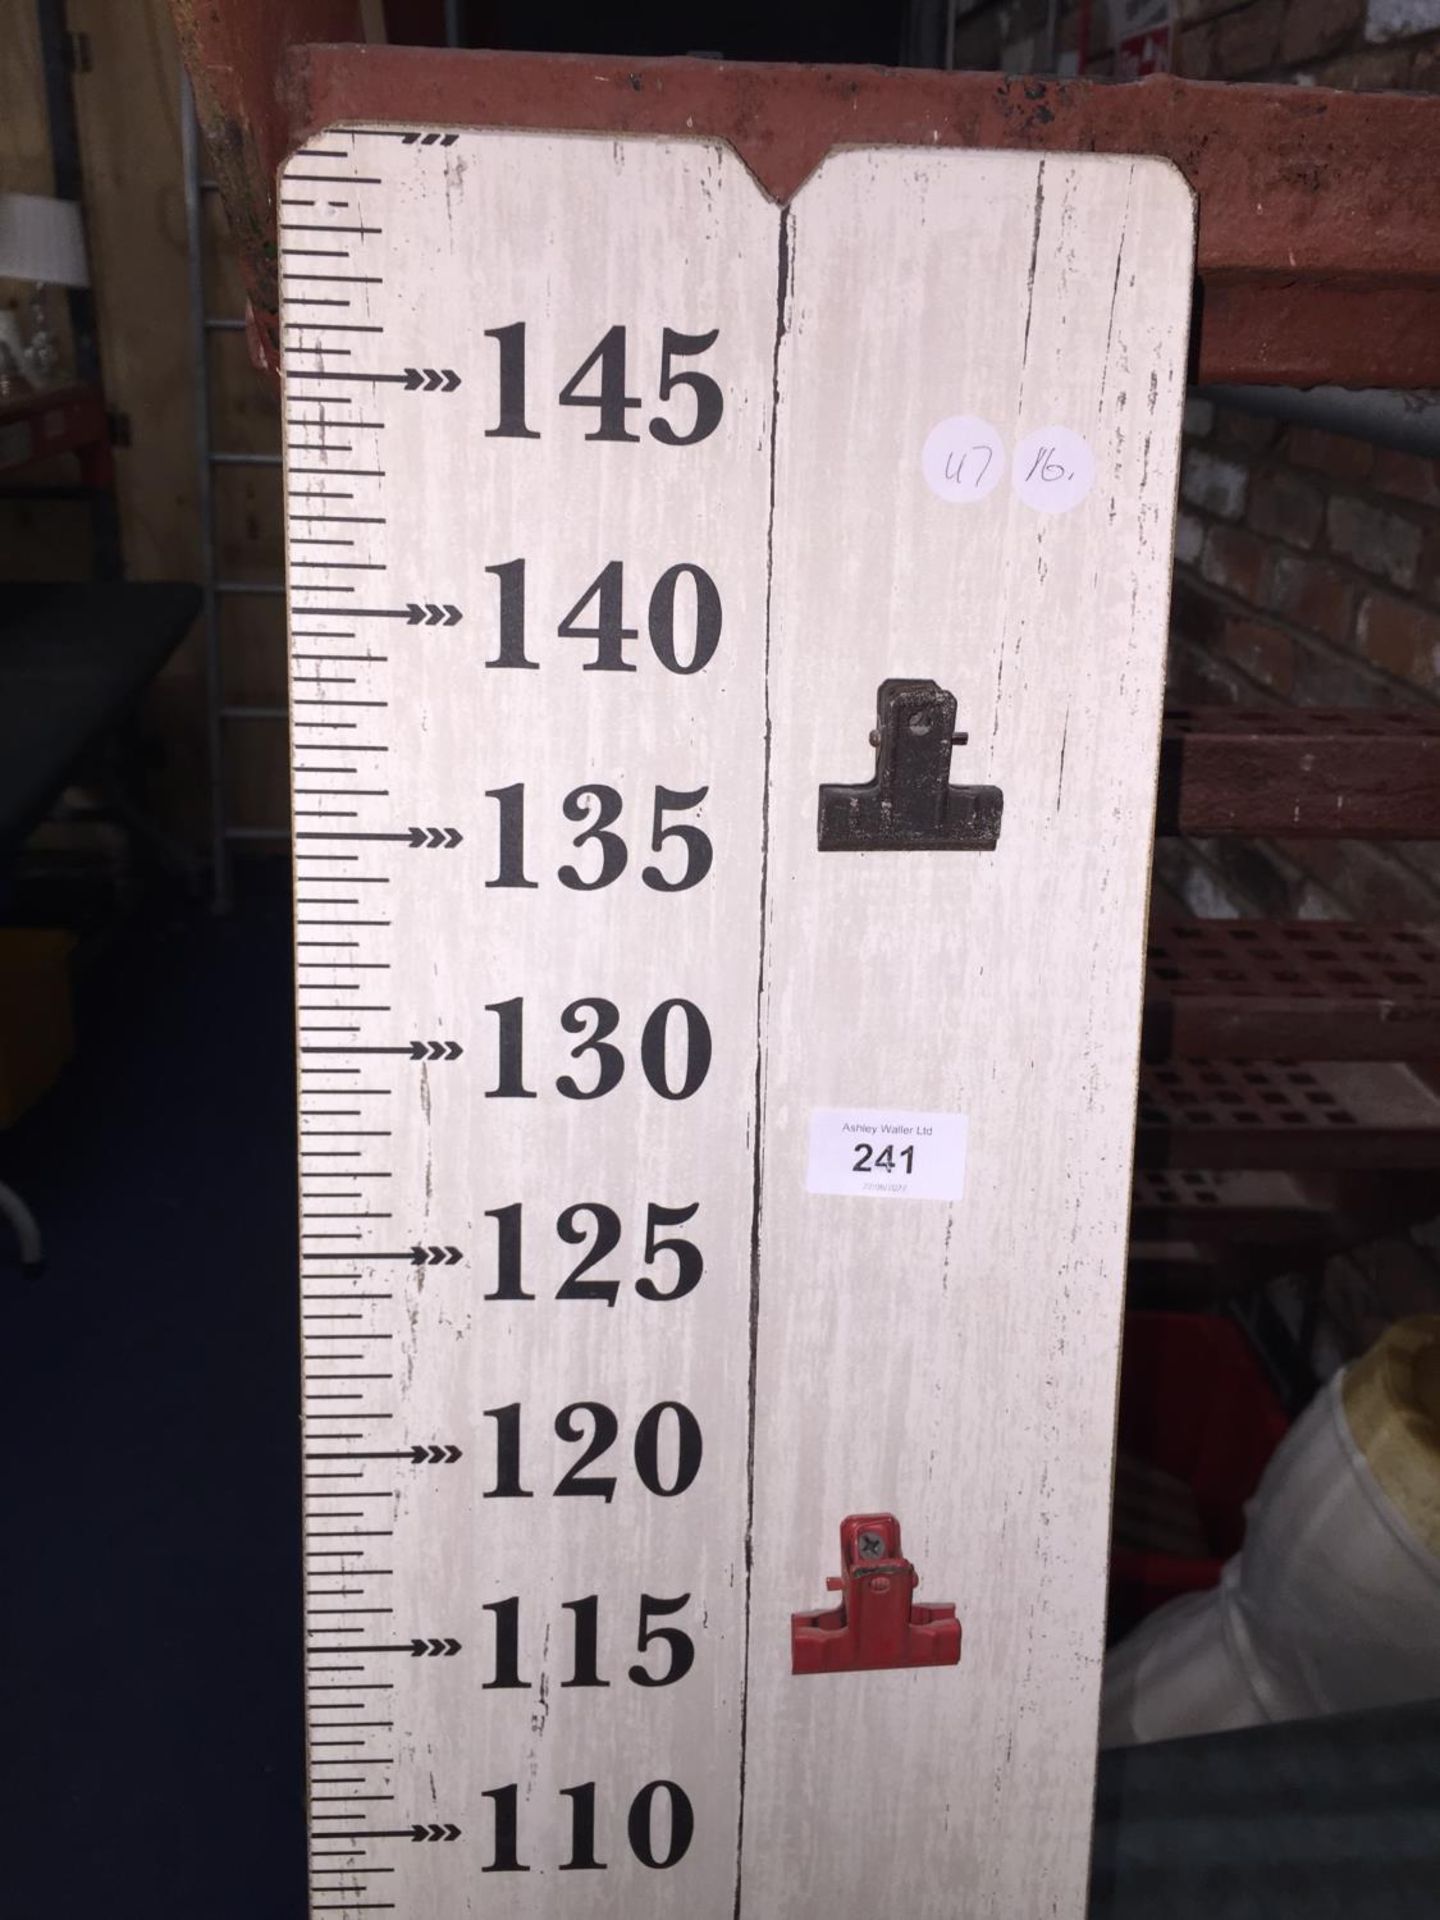 A FAIRGROUND MEASURING STICK MEASURING CHILDREN'S HEIGHT - Image 2 of 3